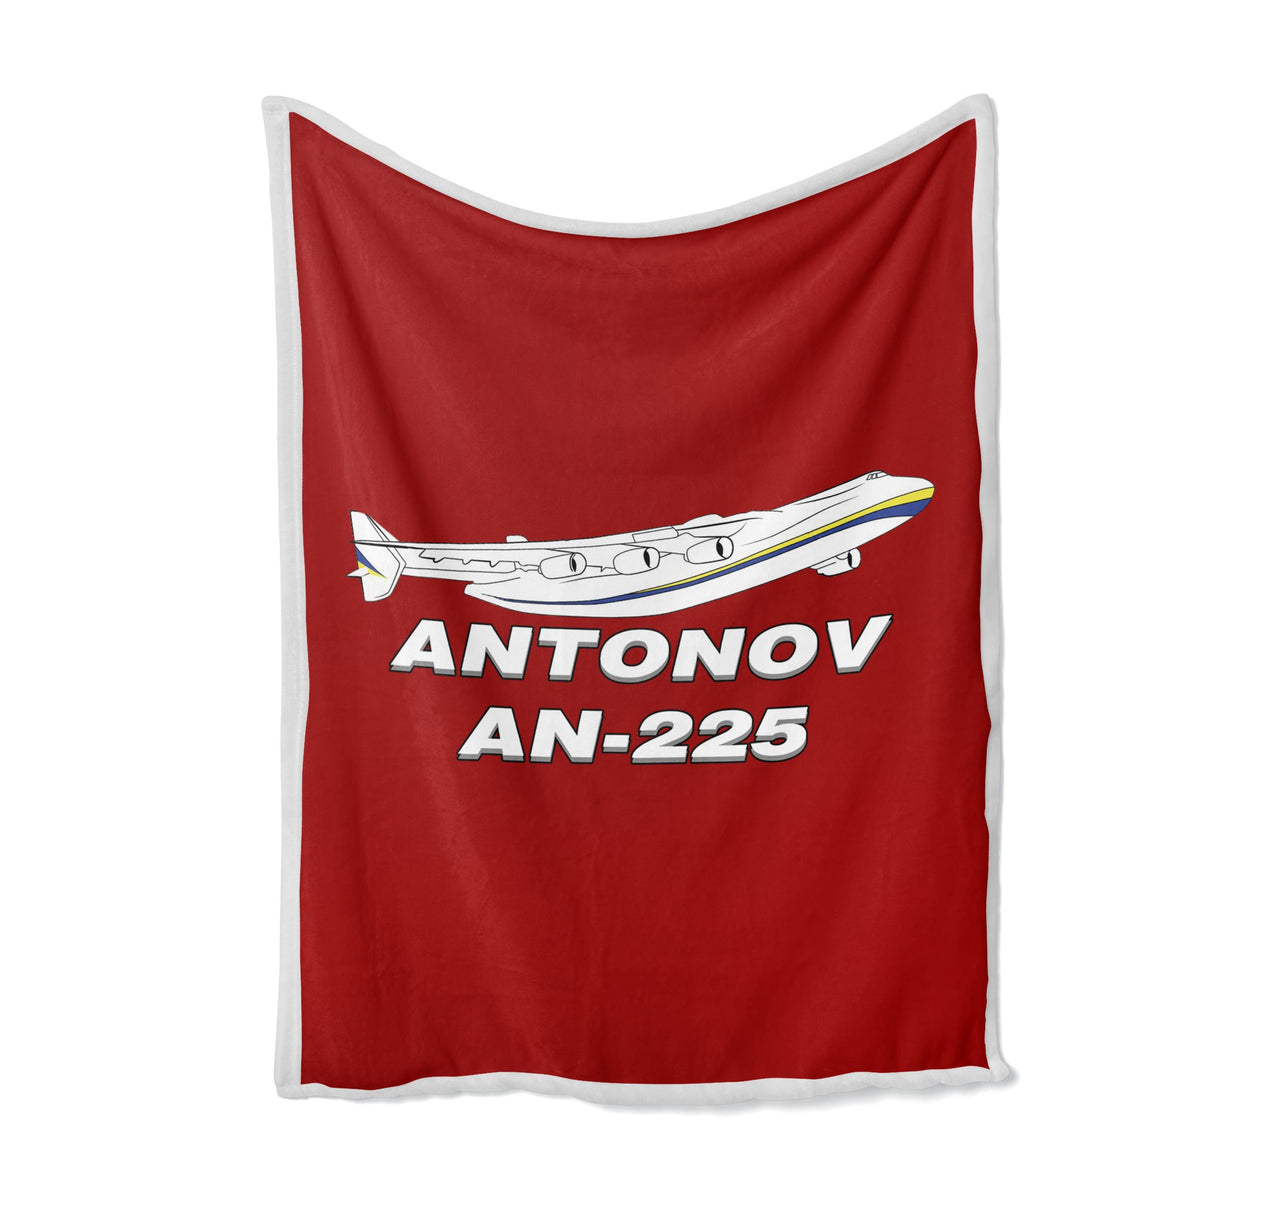 Antonov AN-225 (27) Designed Bed Blankets & Covers